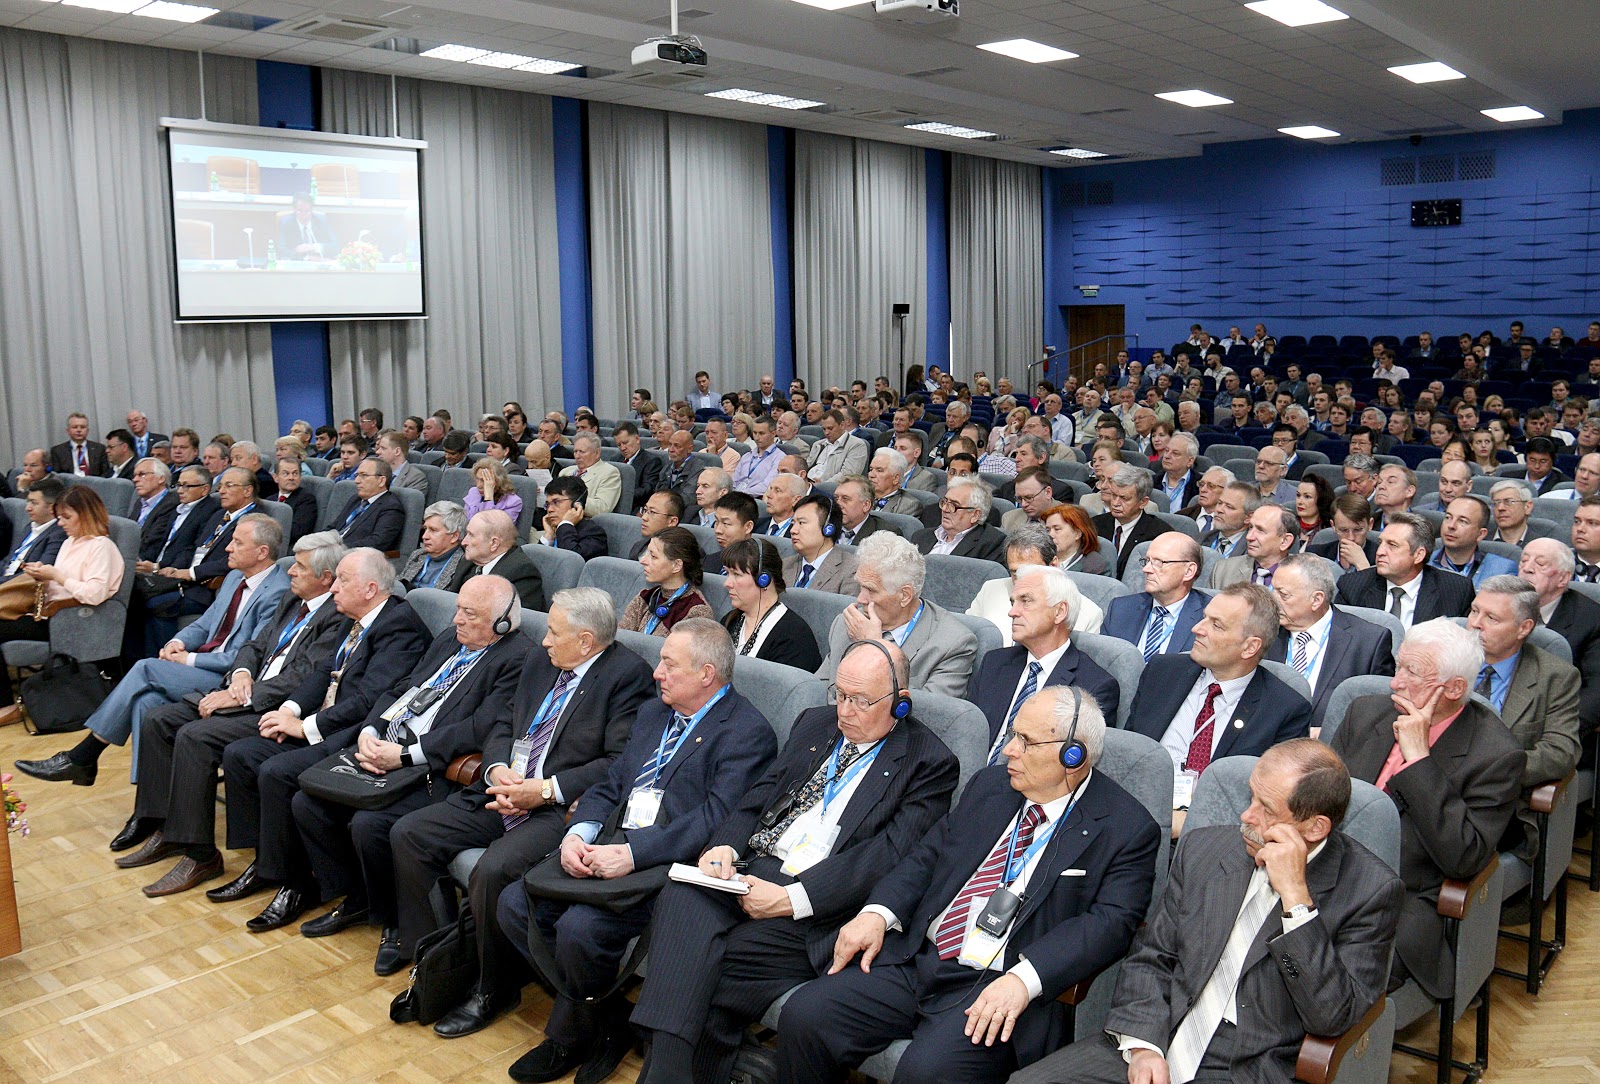 6th IAA Conference on Space Technologies - Present and Future